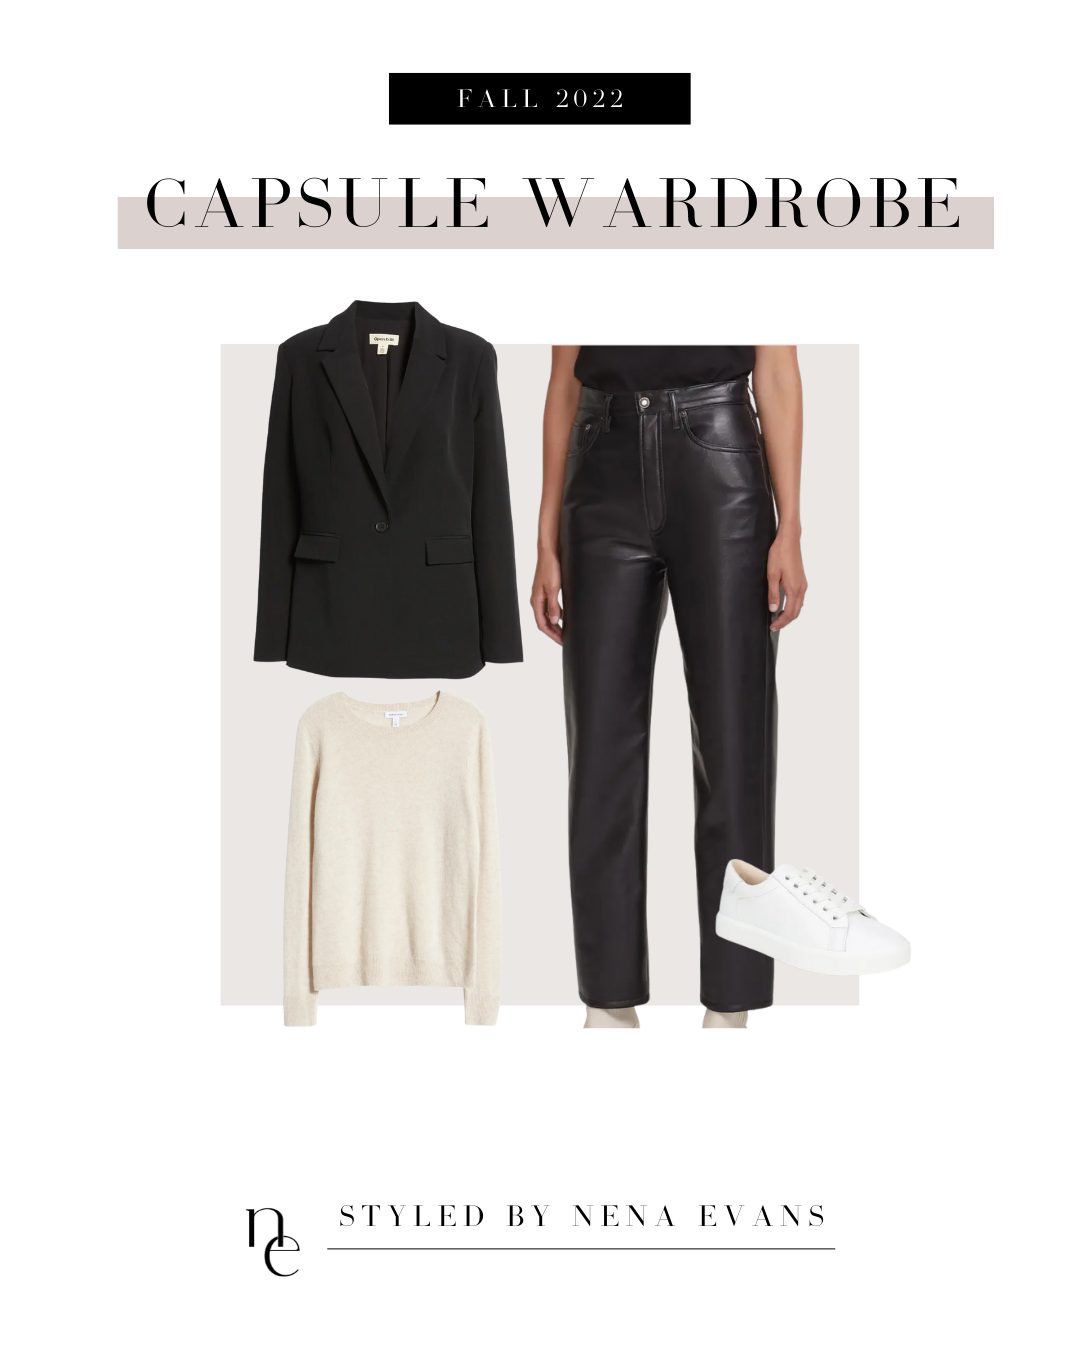 Fall Capsule Wardrobe 2021 - Nena Evans  Professional outfits women,  Business casual outfits for work, Work outfits women